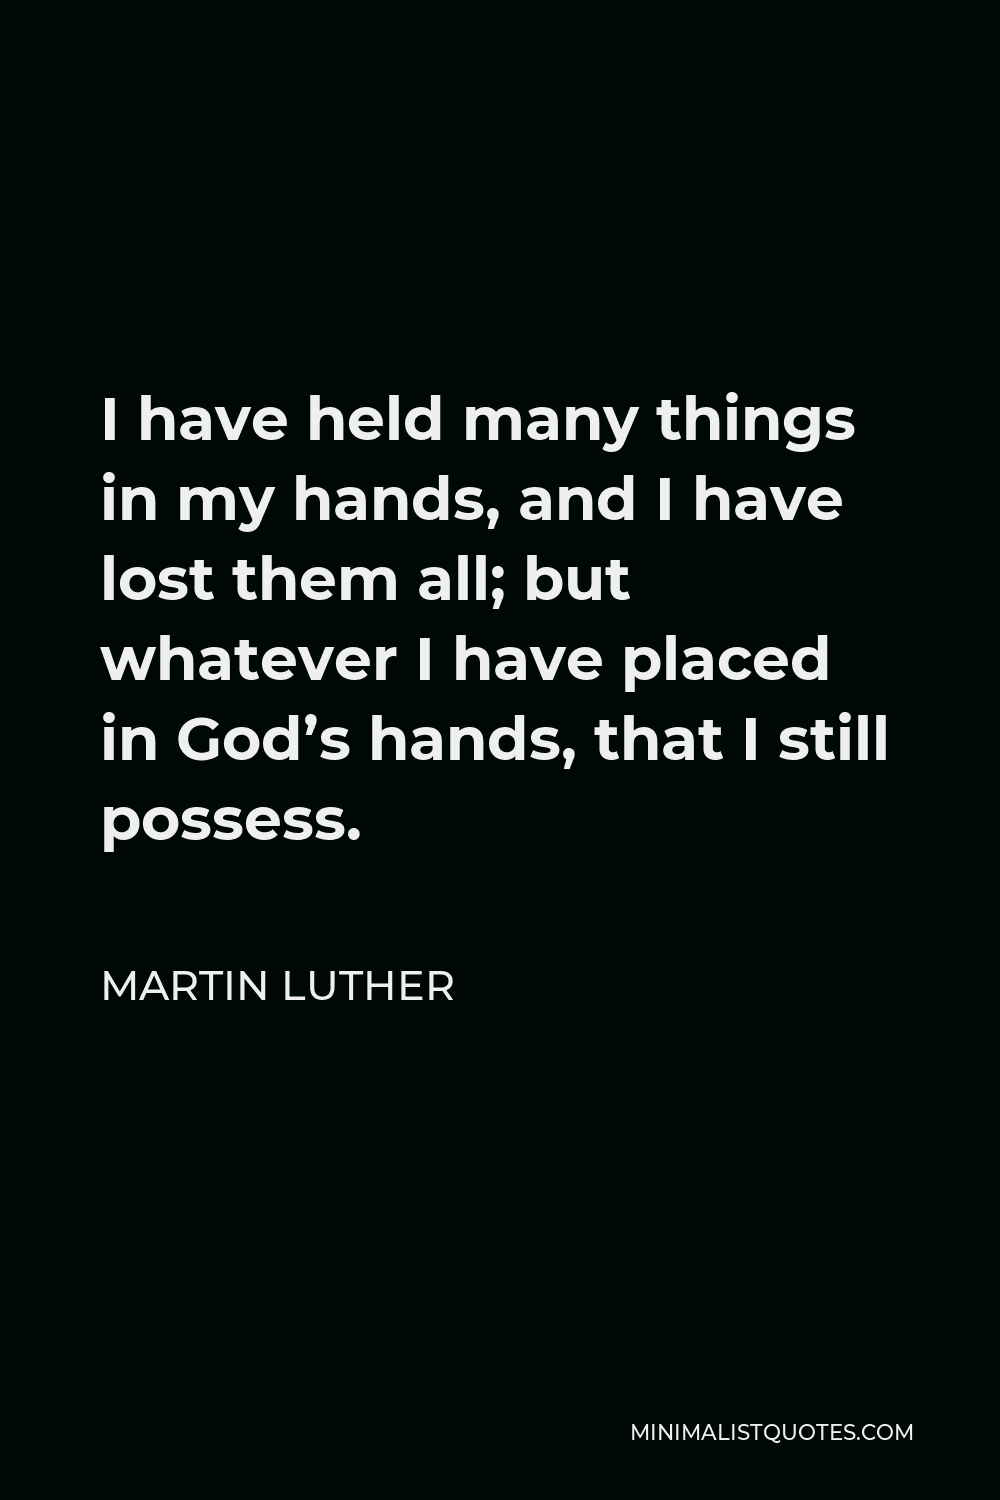 Martin Luther Quote - I have held many things in my hands, and I have lost them all; but whatever I have placed in God’s hands, that I still possess.